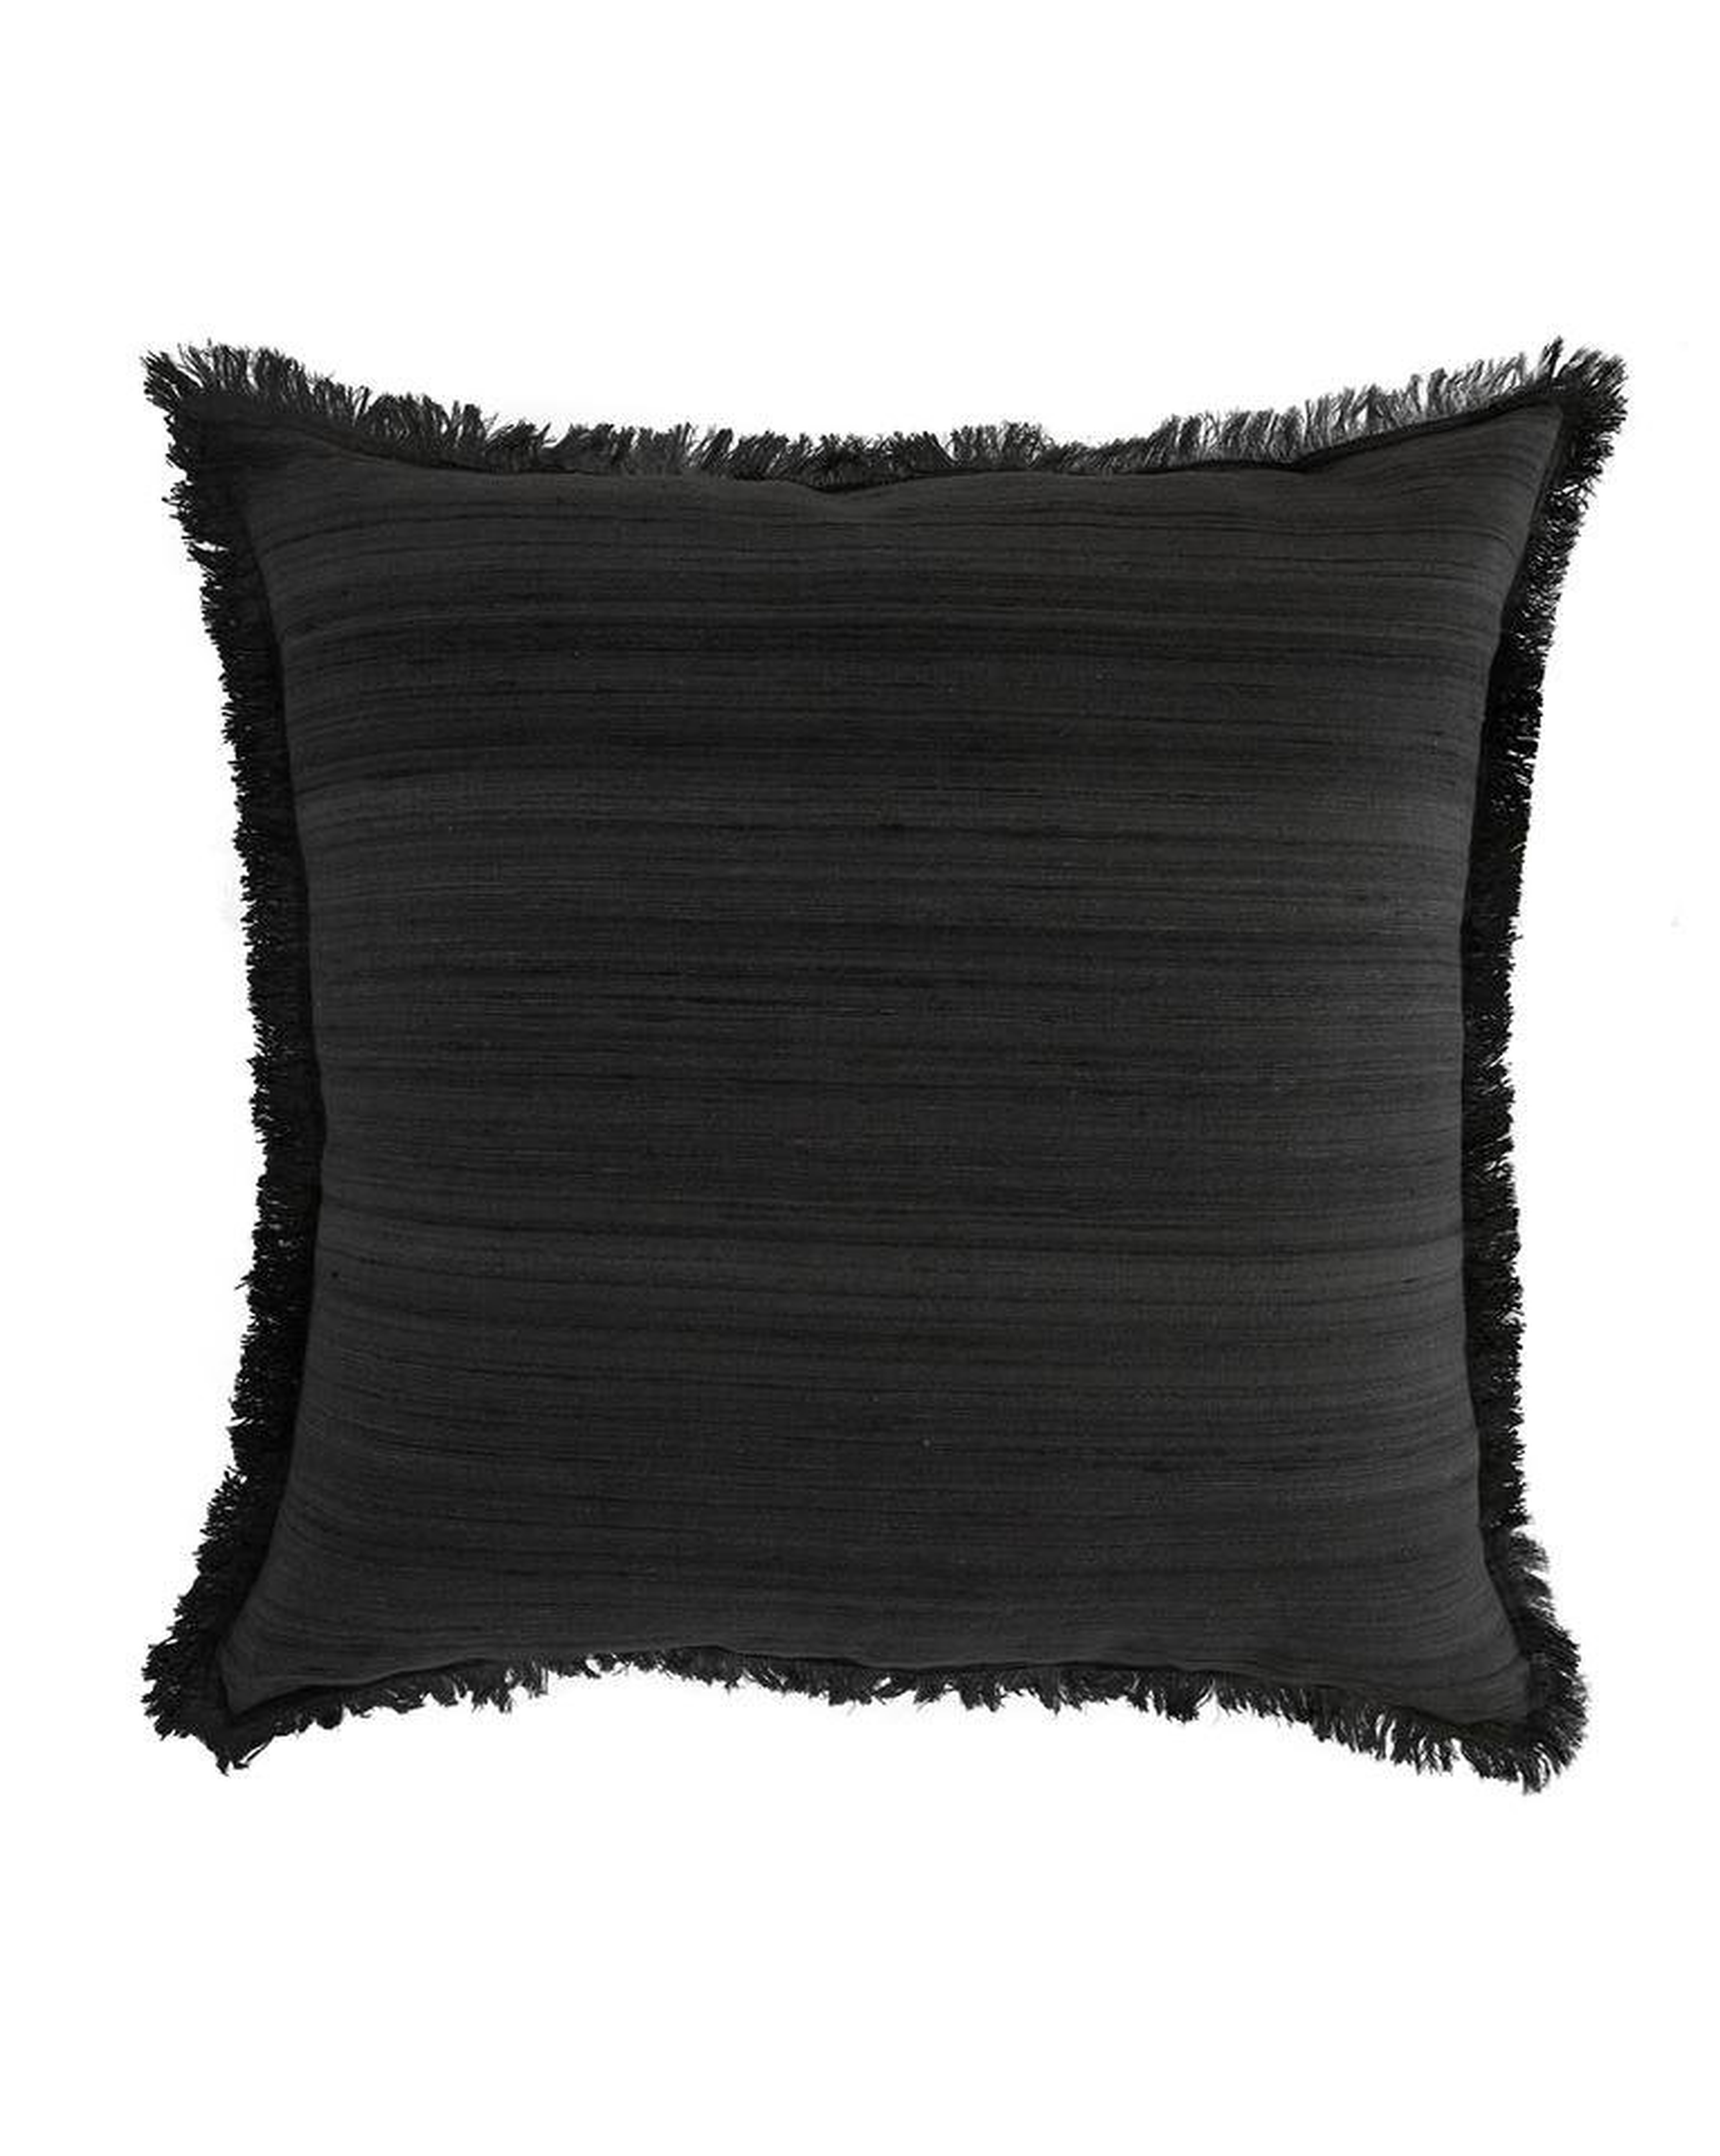 Abbey Silk Fringe Pillow Cover, 24" x 24" - McGee & Co.